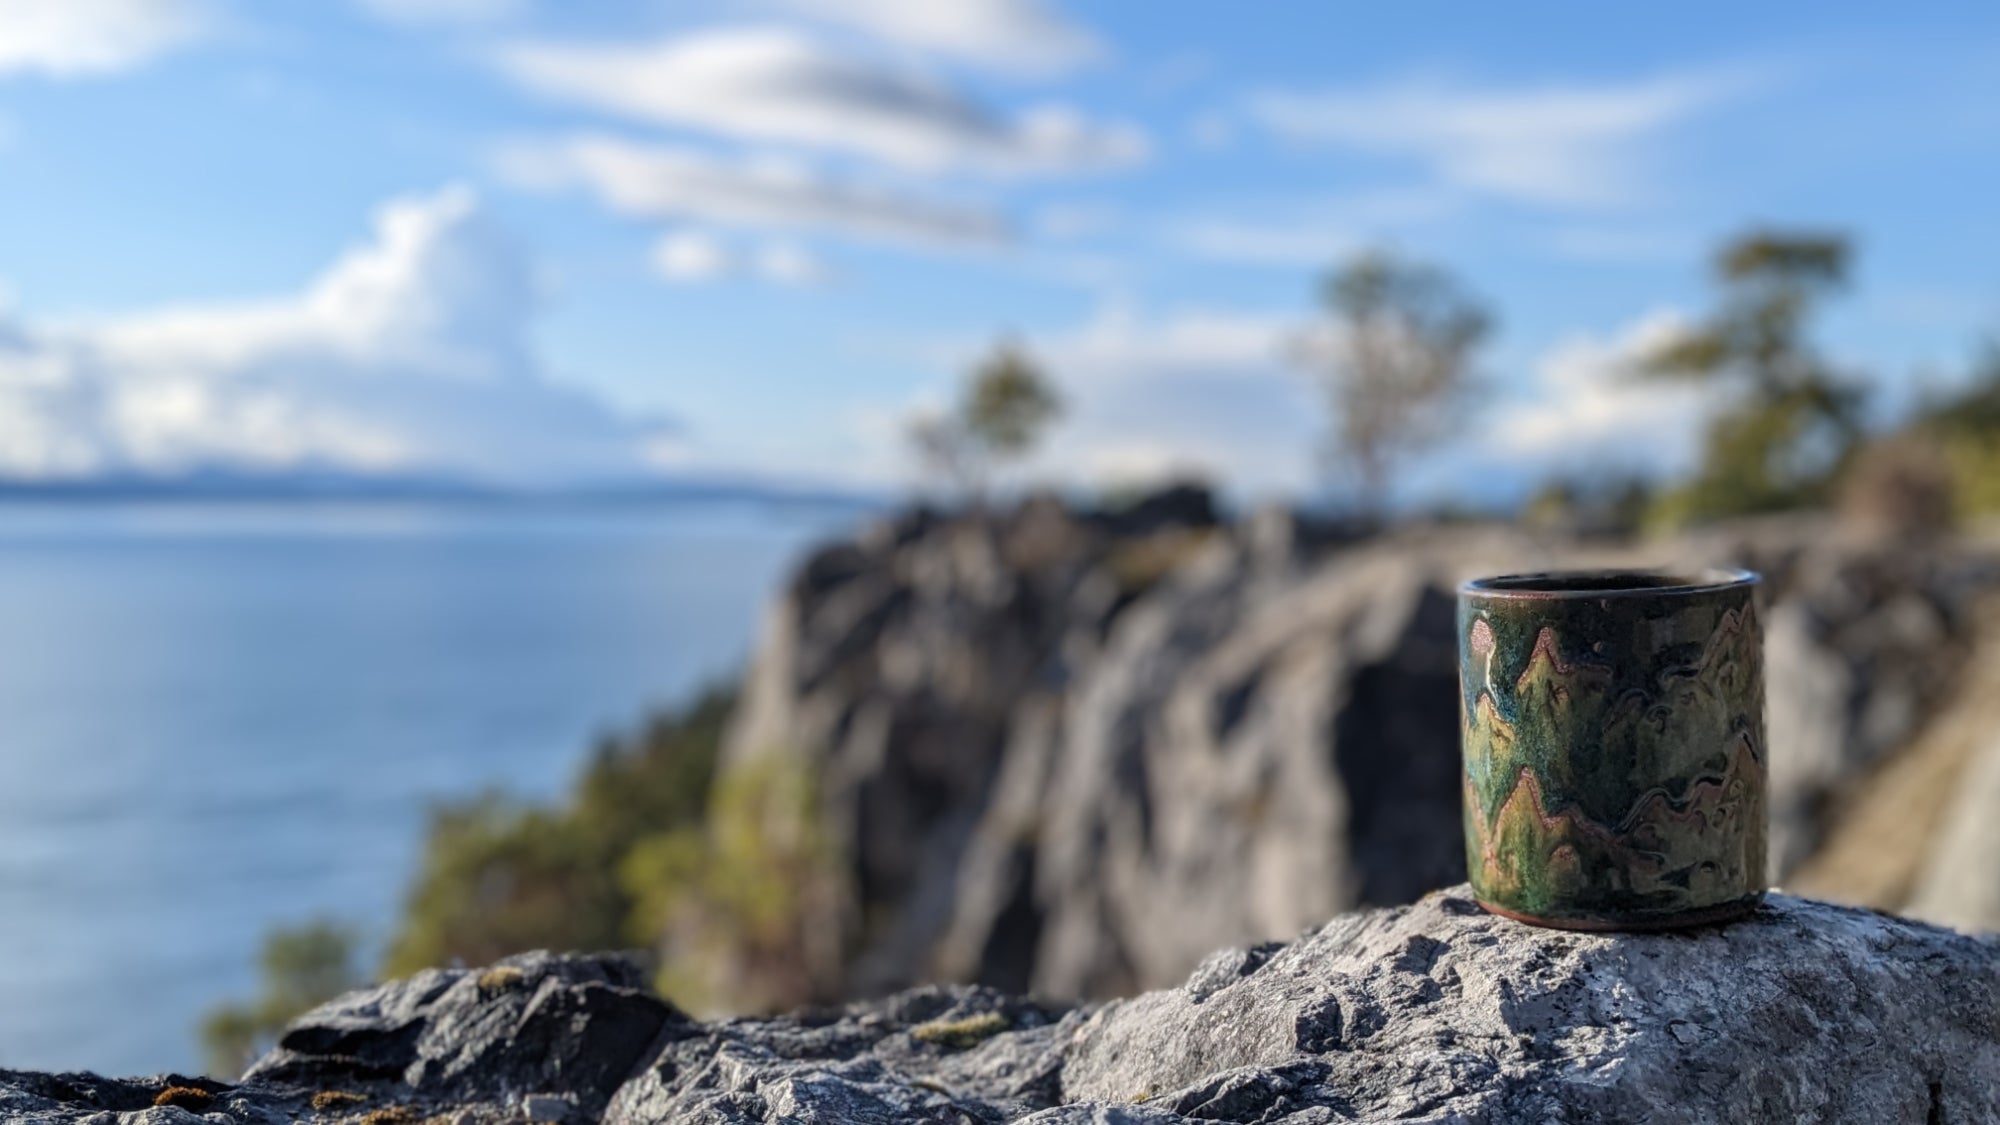 Handmade Pottery (a cup with hand painted mountains)by Living Large Small on San Juan Island, WA